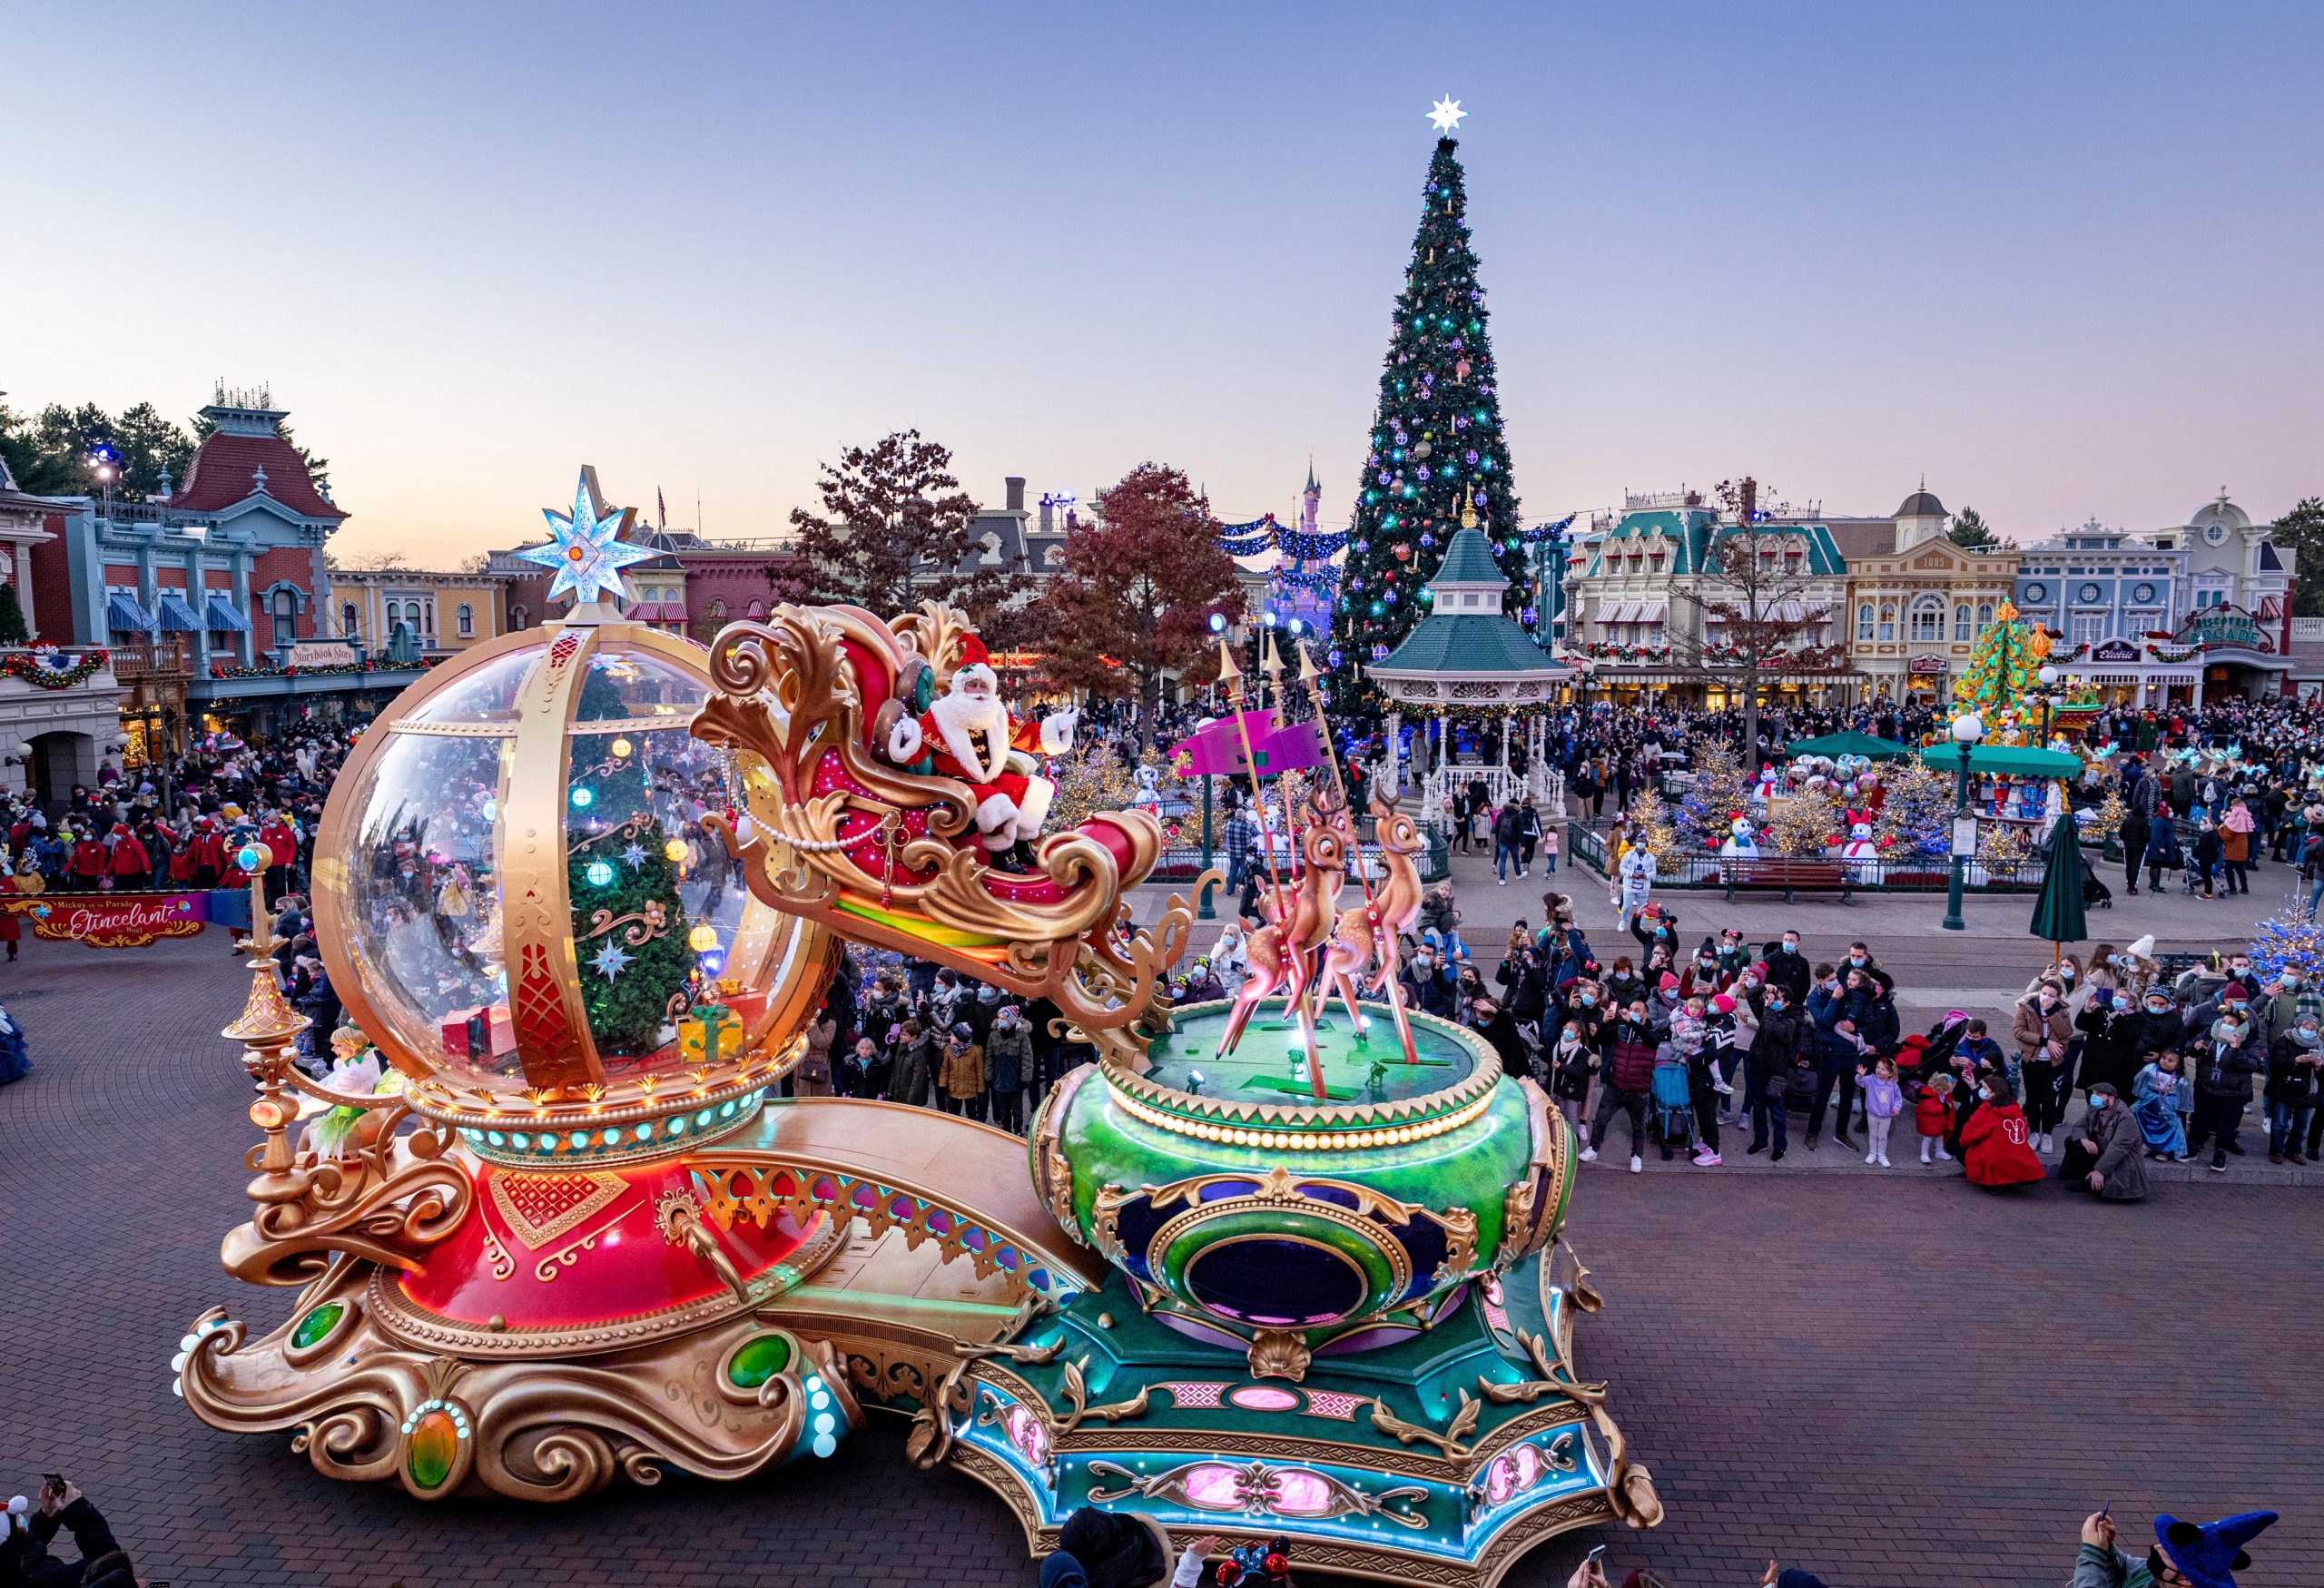 Disneyland Paris Launches Enchanted Christmas Season with a New Dazzling Parade in the Company of Many European Celebrities